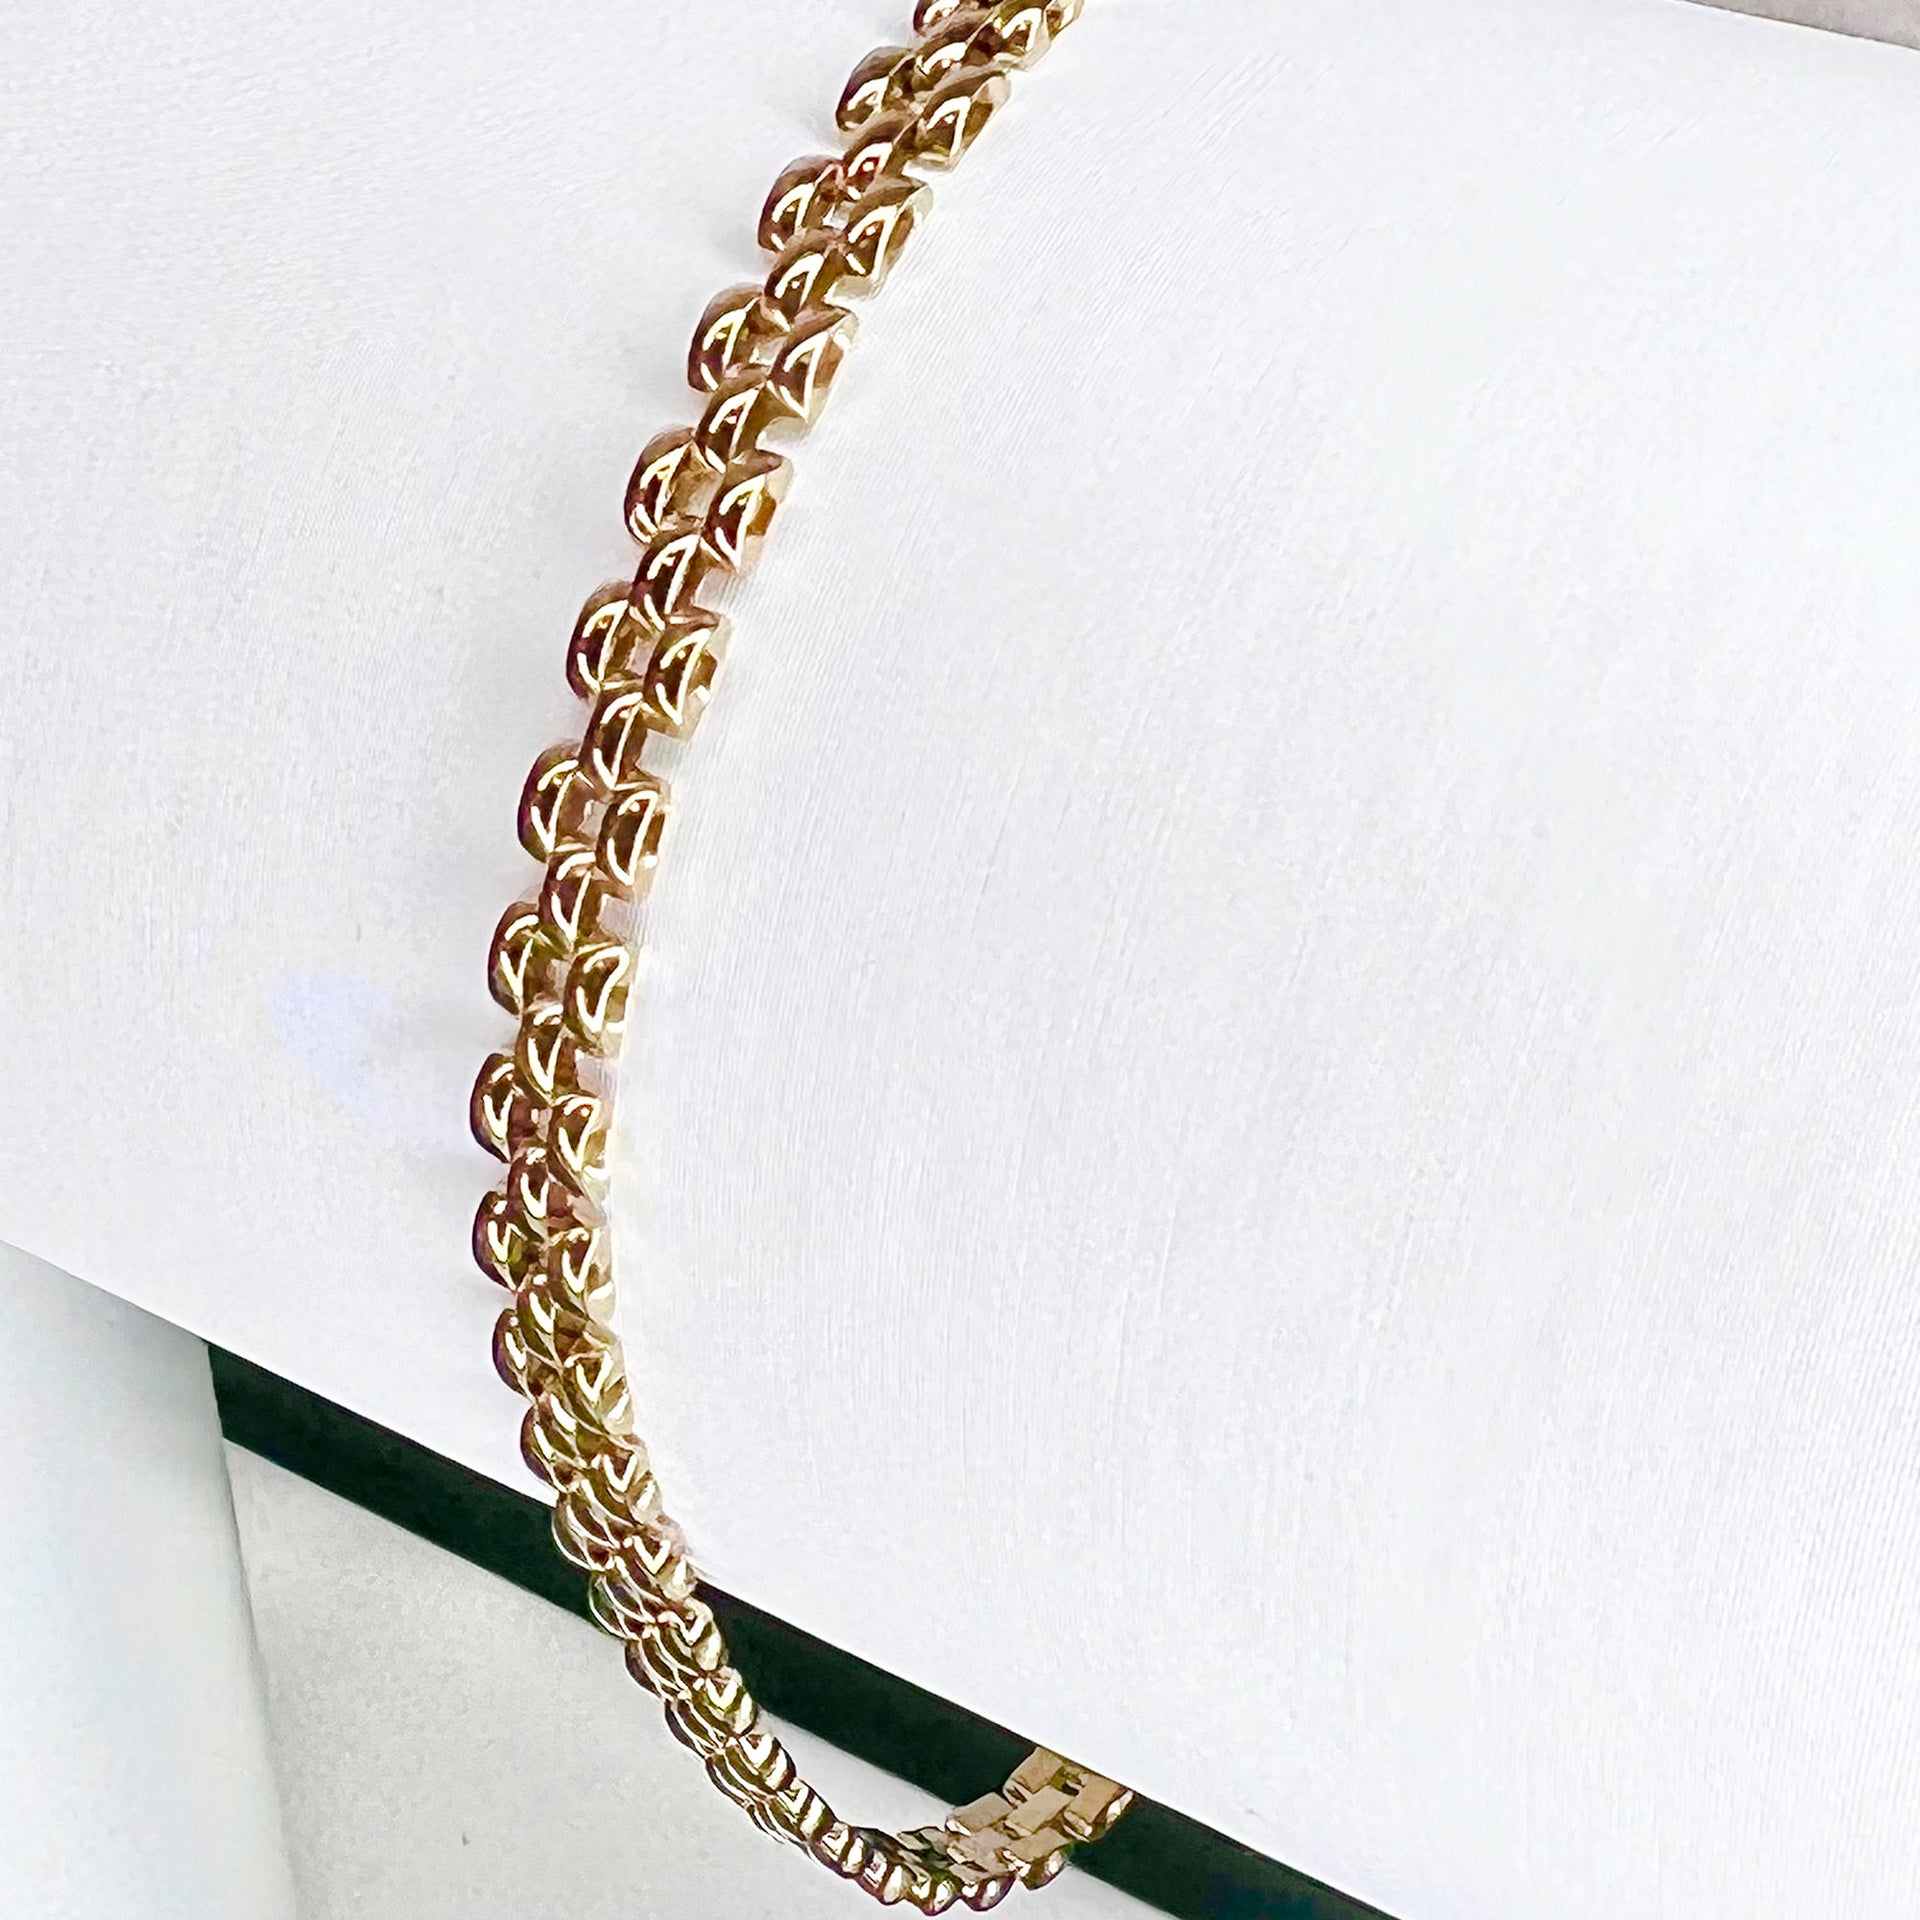 9ct Solid Gold 3 Row Panther Bracelet